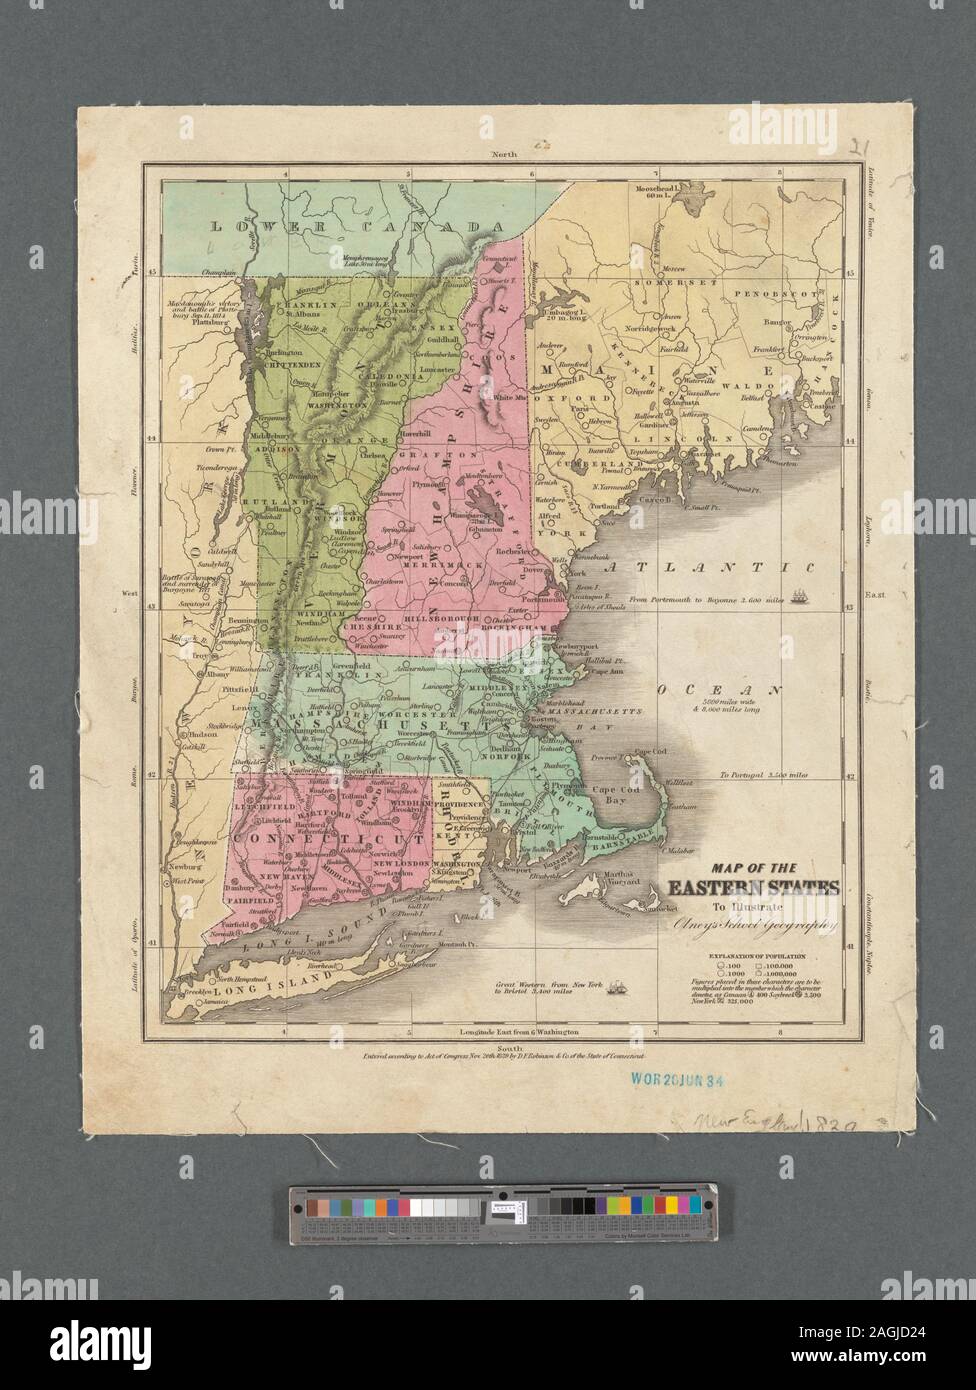 Relief shown by hachures. Shows counties, cities, and major transportation routes in New England states; shows battlefields in adjacent eastern New York state. Includes explanation of population, waterbody dimensions, and distances. Prime meridian: Washington. In margins: North, East, South, West; names of cities on same line of latitude. Mapping the Nation (NEH grant, 2015-2018); Map of the Eastern States Stock Photo